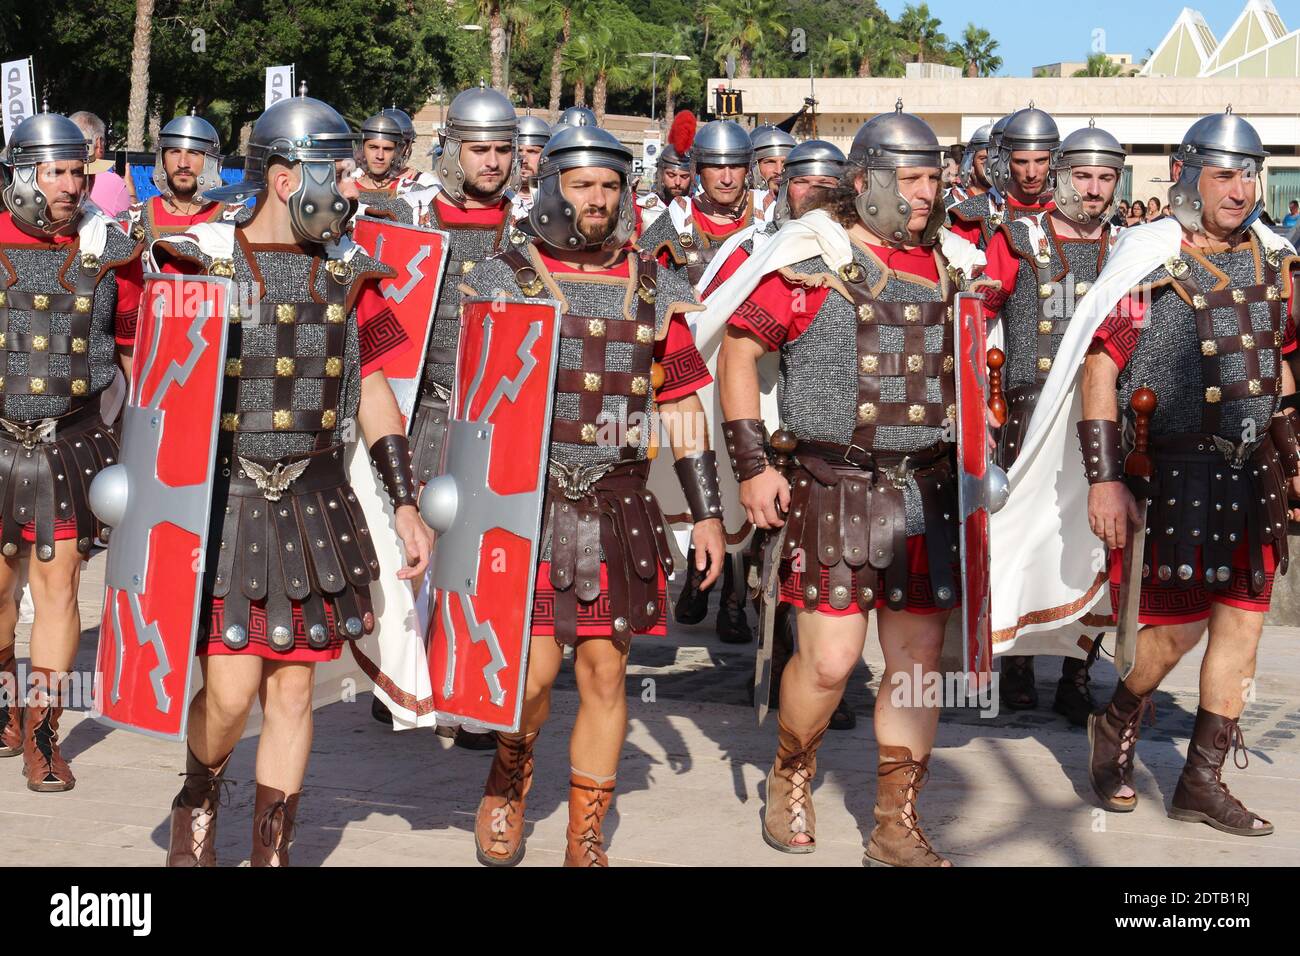 An annual festival in Cartagena, Spain is the Cartaginians and Romans. Here a group of Roman soldiers set off for the battleground to face the enemy. Stock Photo